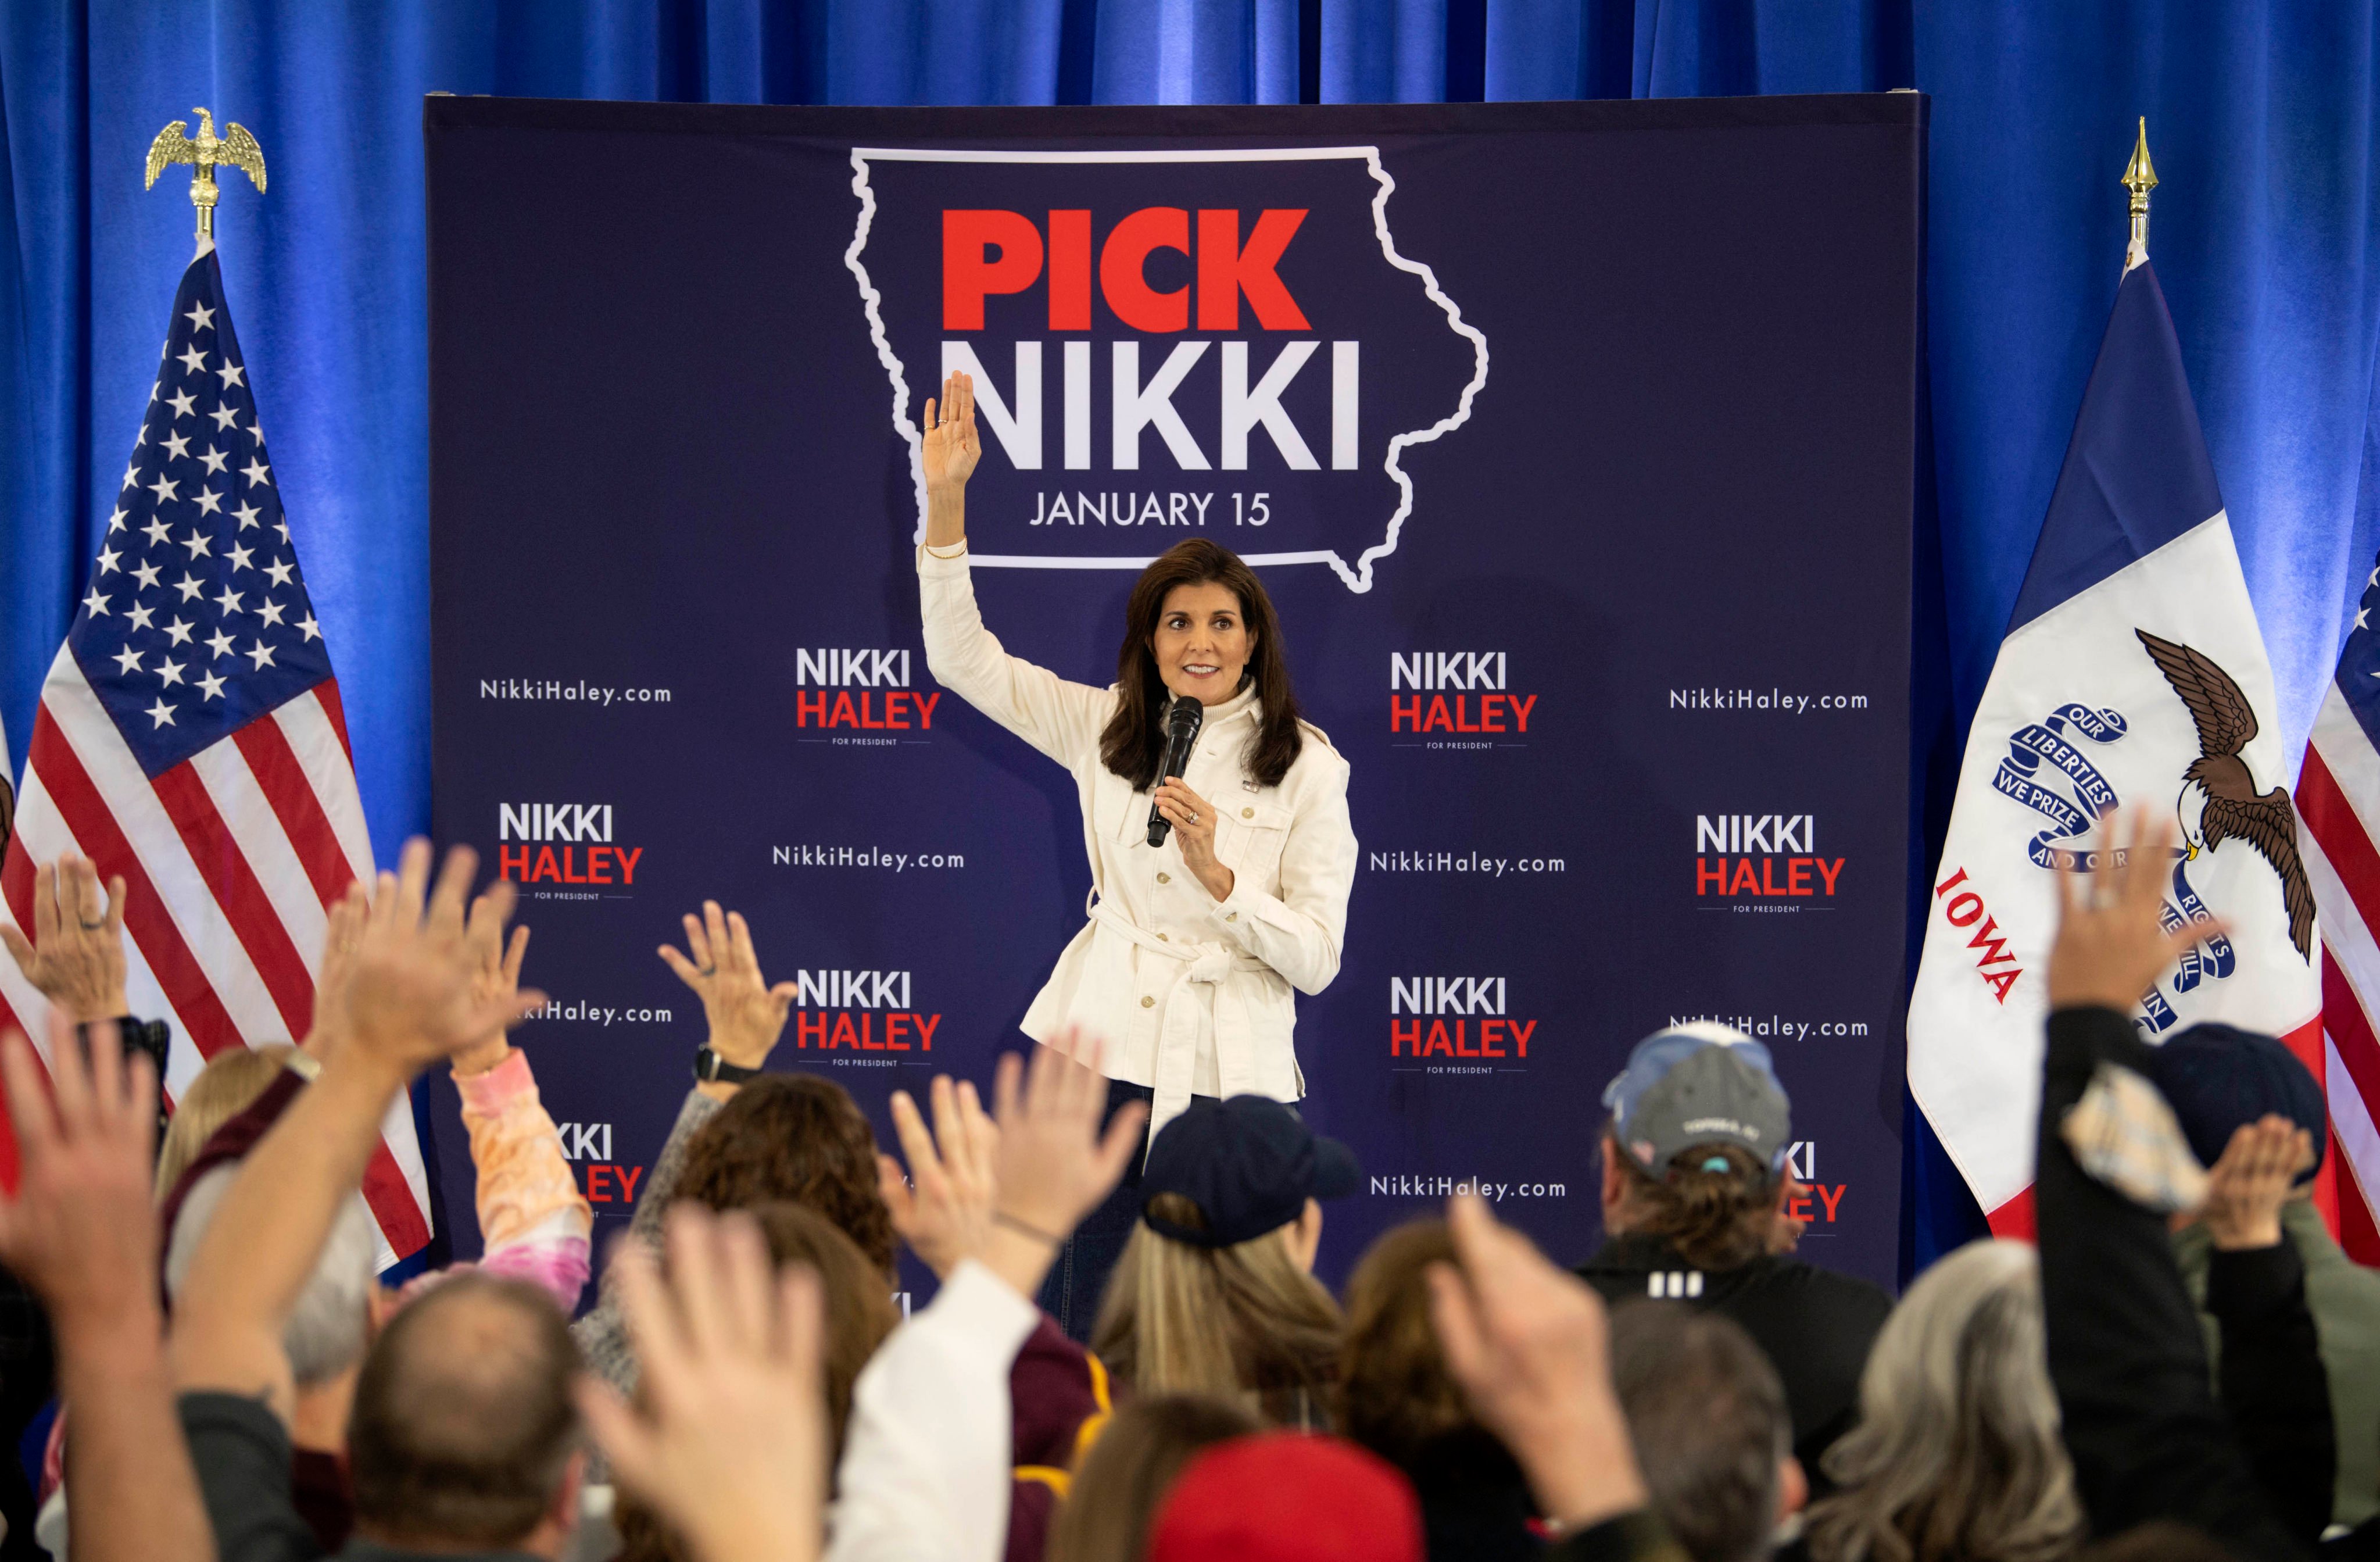 US Republican presidential hopeful Nikki Haley speaks during a campaign event in Indianola, Iowa, on January 6. Haley and Florida Governor Ron DeSantis have emerged as the leading contenders for second place in the Republican primaries behind former president Donald Trump. Photo: dpa